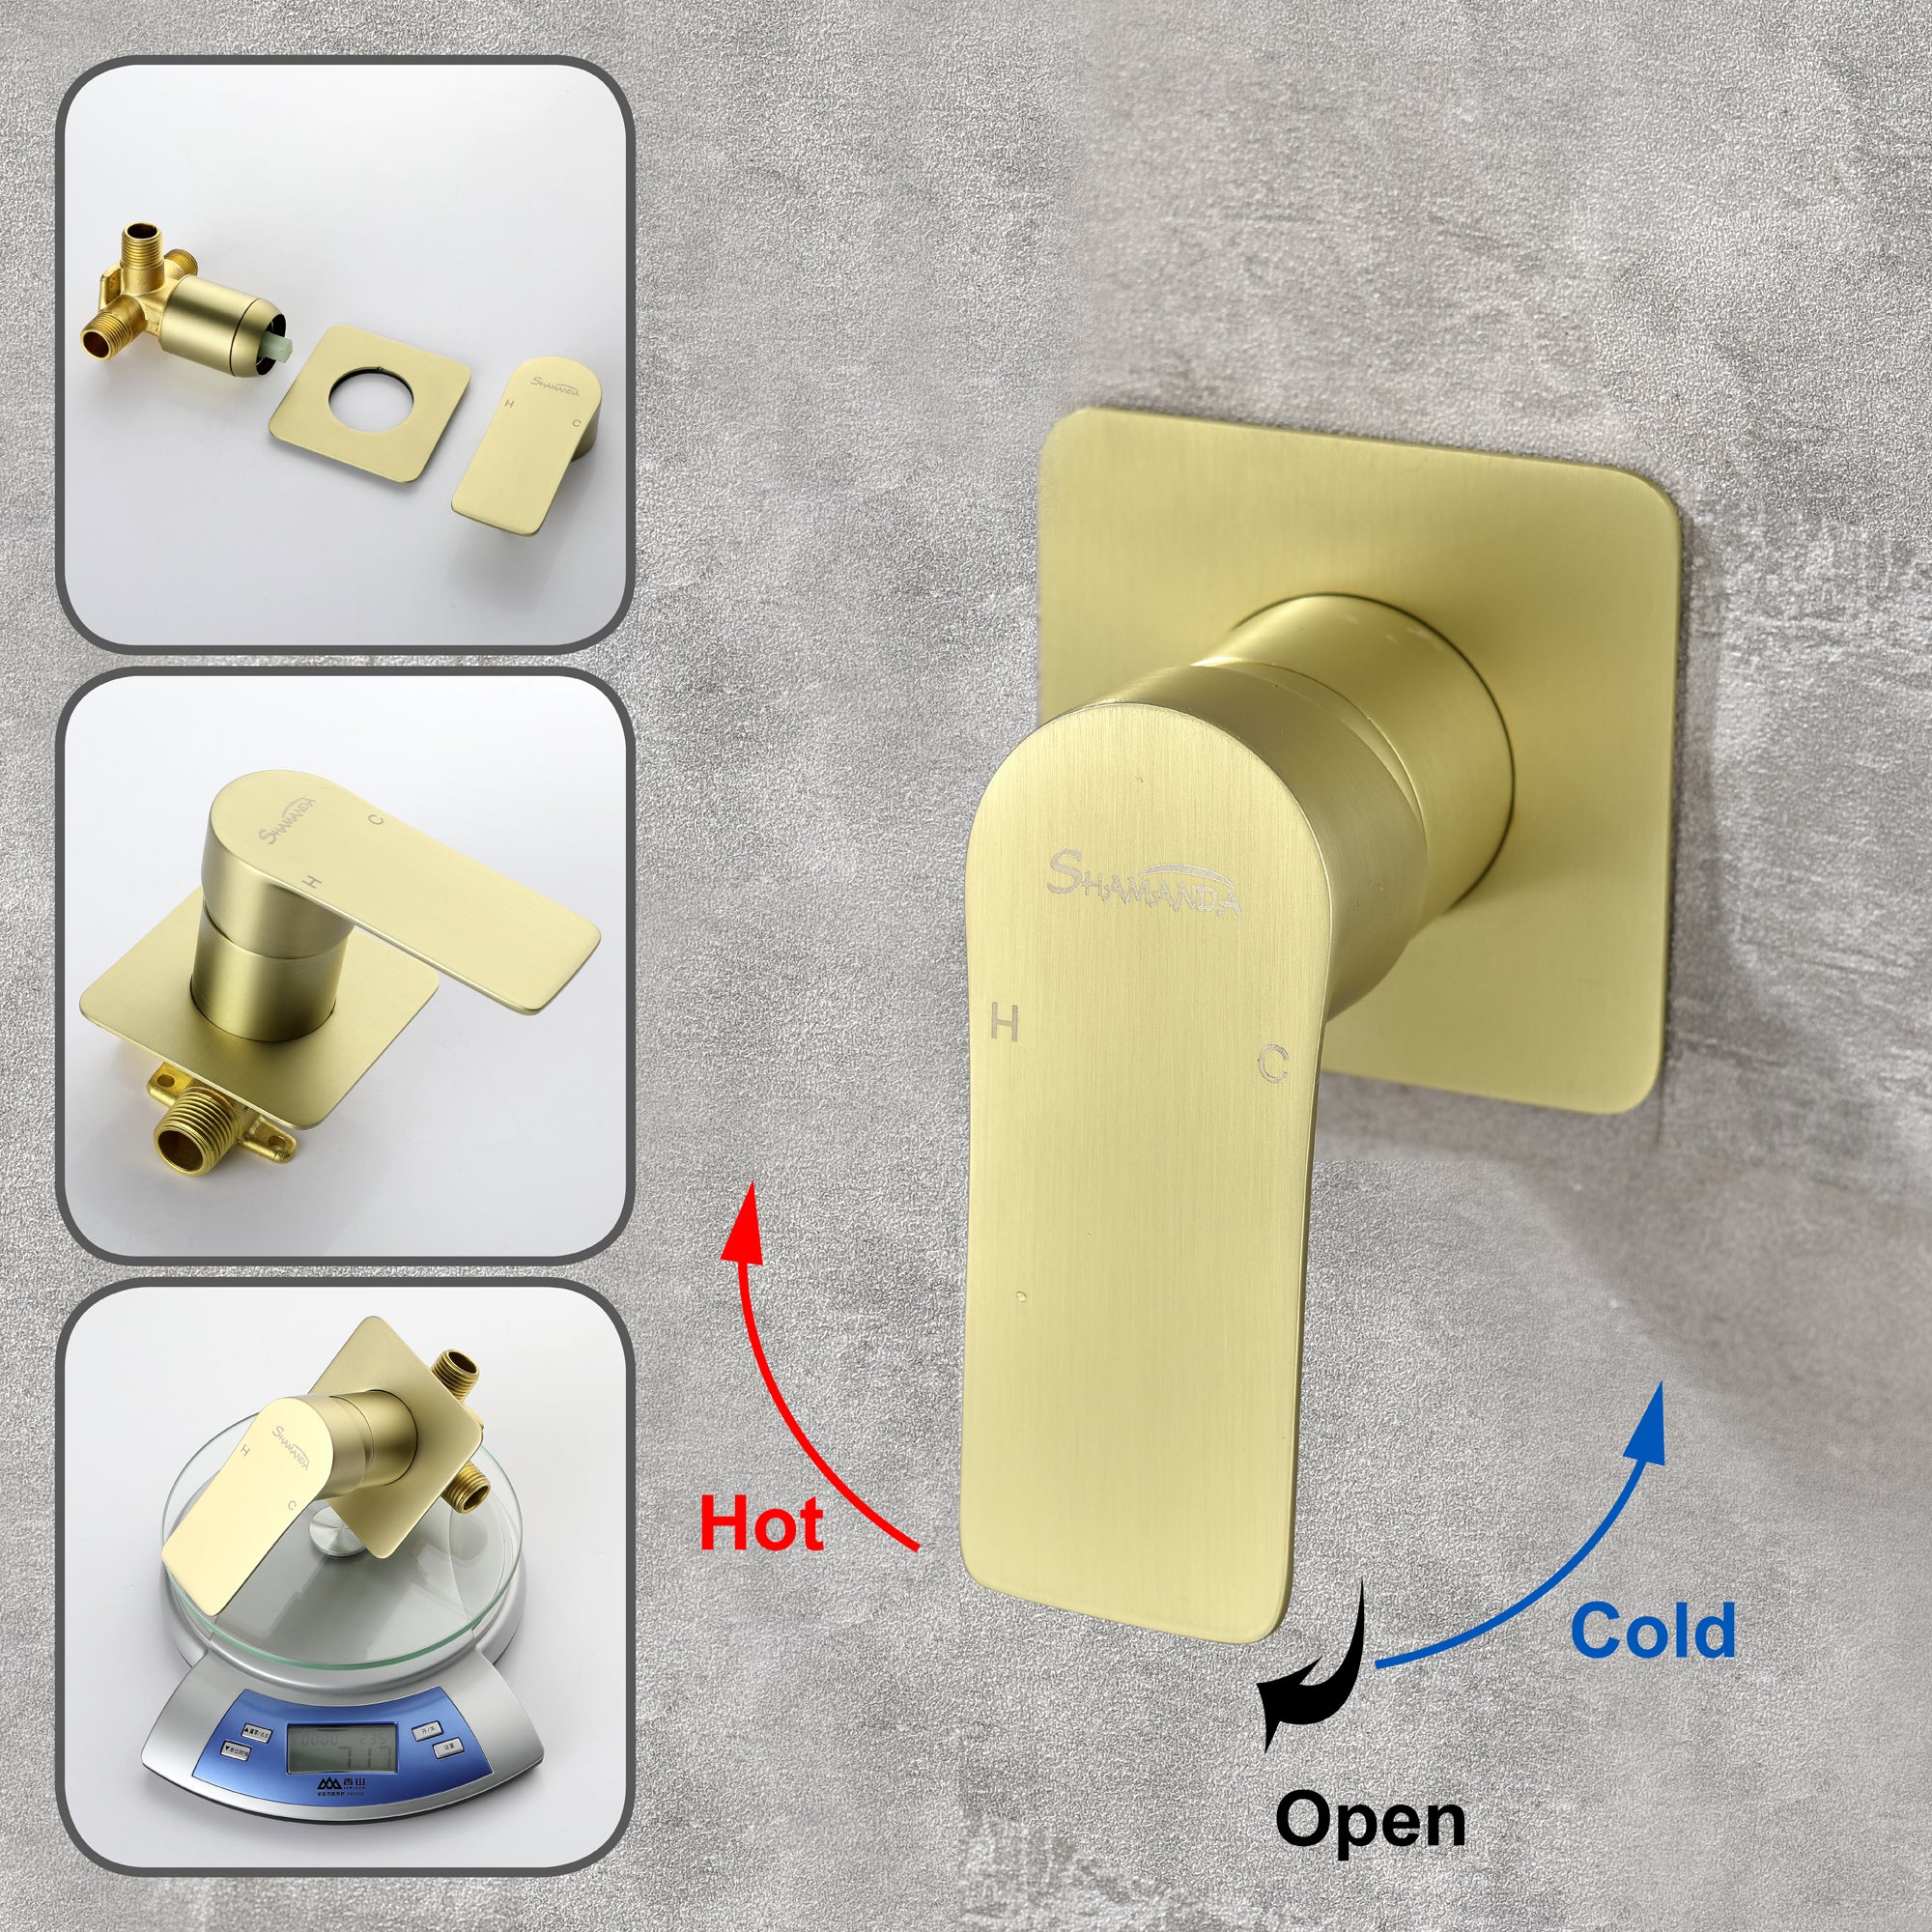 Shower Mixer Tap Bathroom Faucet Wall Mounted Single Lever Brass